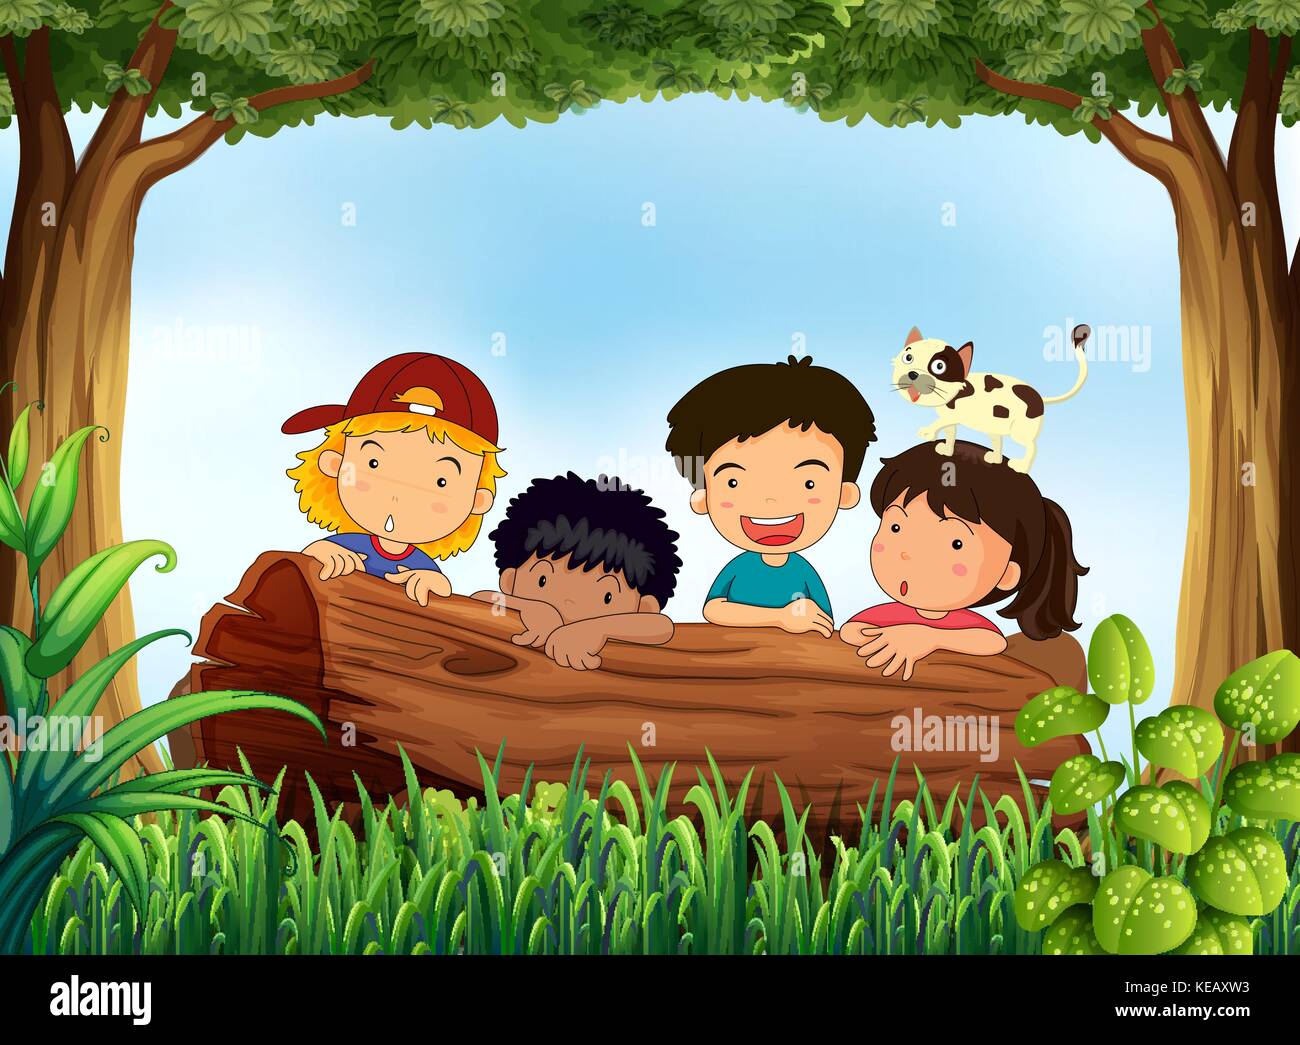 Children Hiding Behind Log In The Forest Stock Vector Image Art Alamy